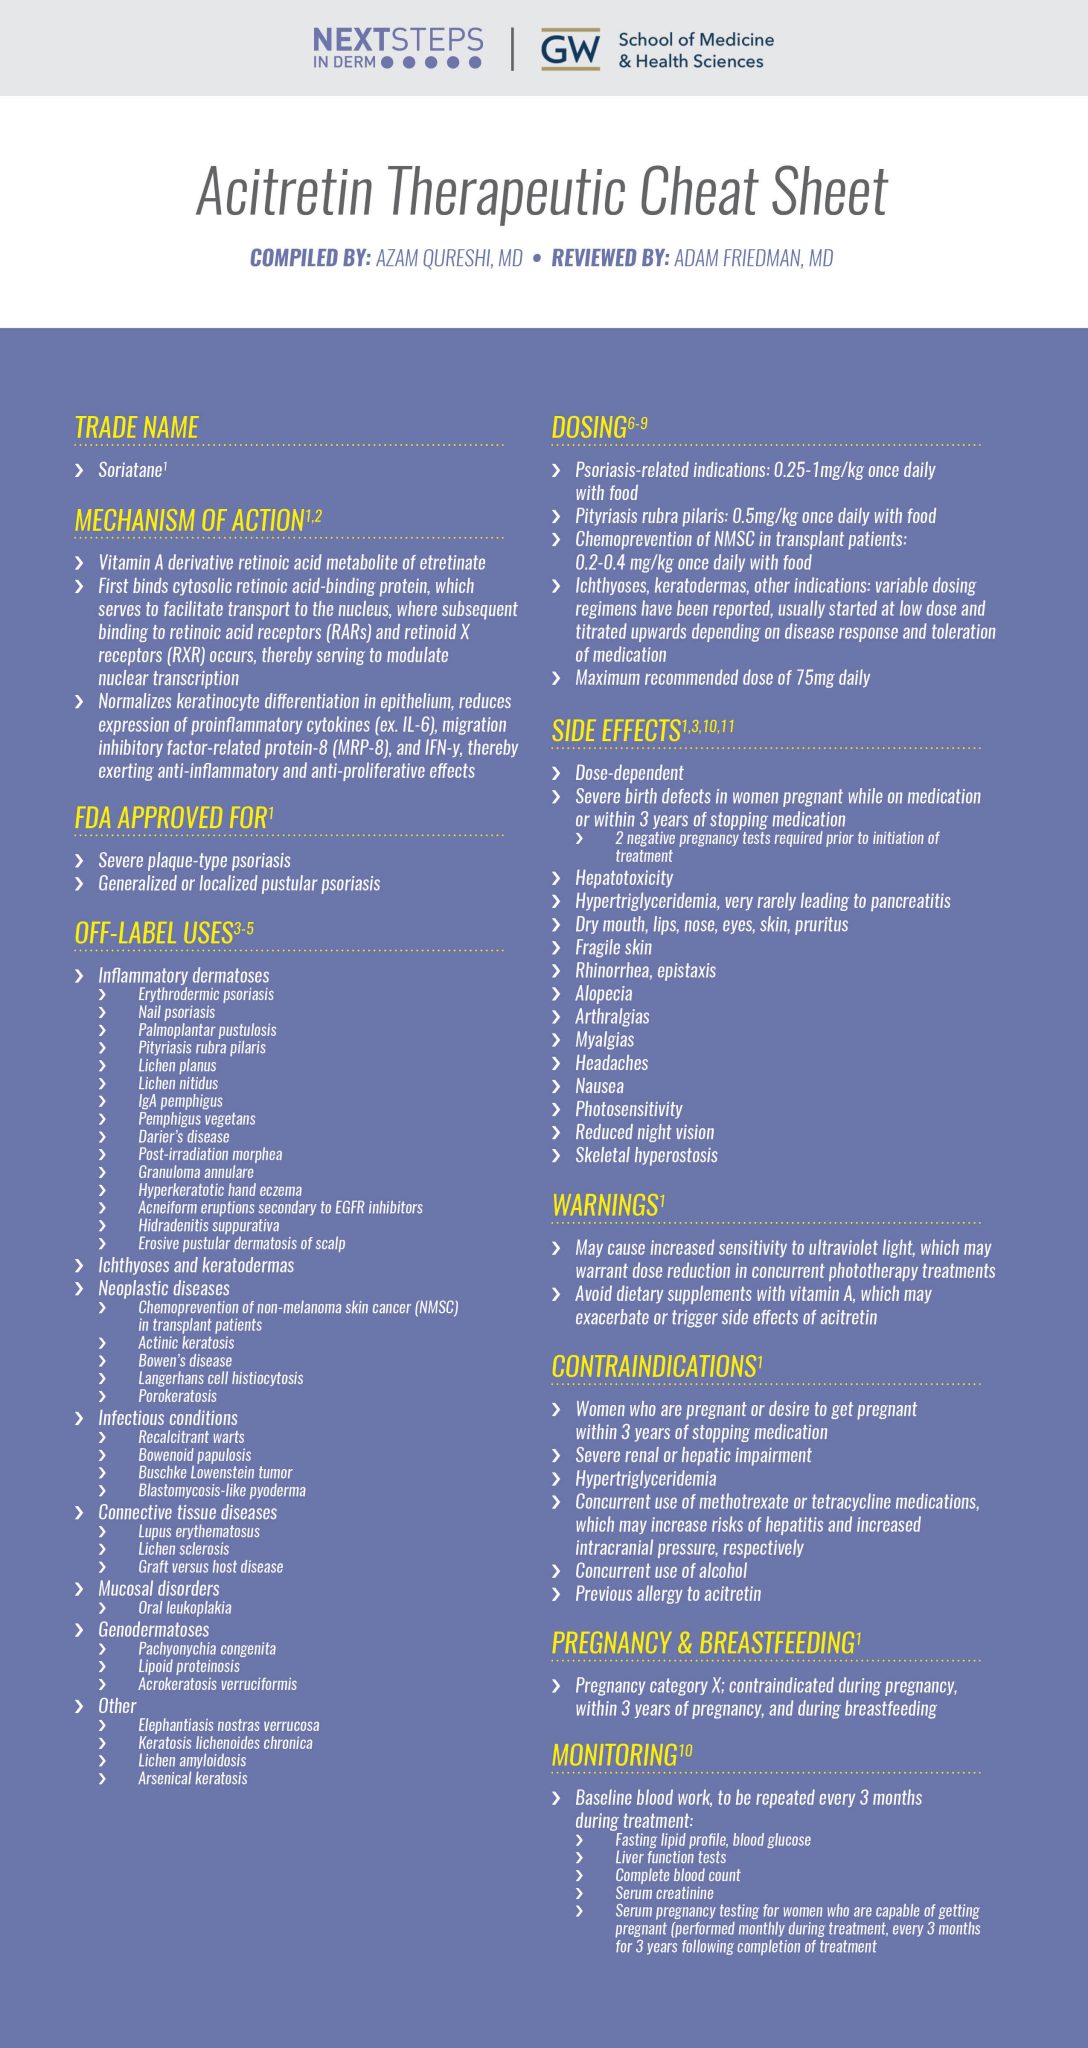 Acitretin for Psoriasis | Therapeutic Cheat Sheet - Next Steps in ...